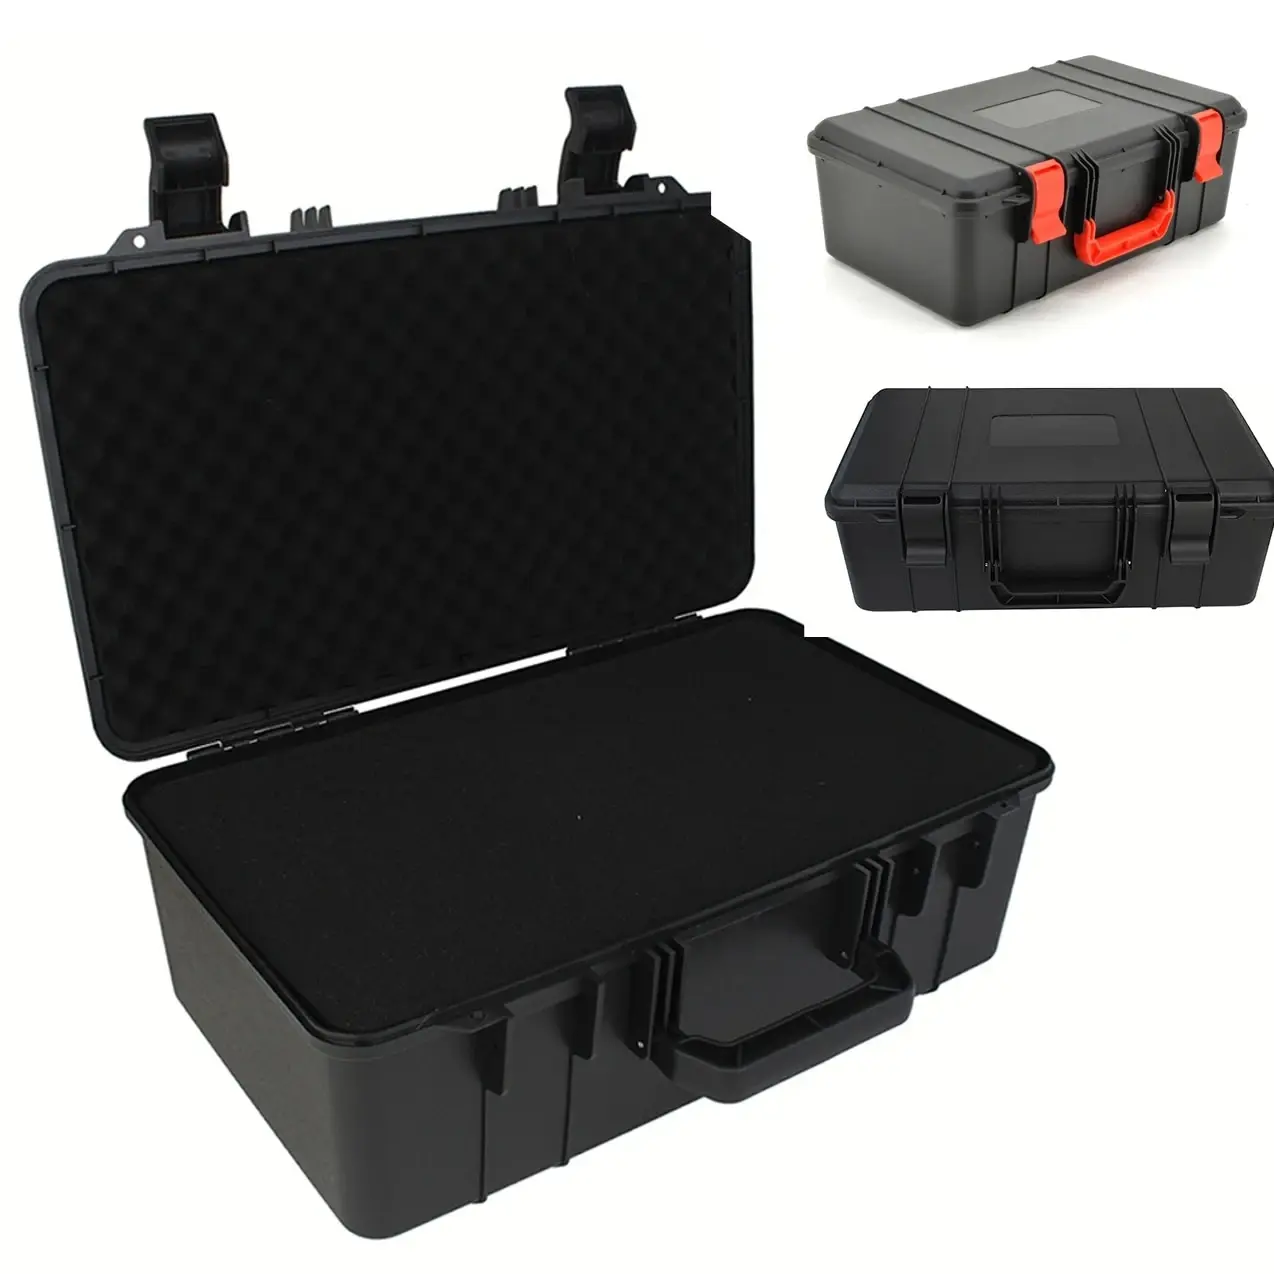 Waterproof Protective Tool Box Hard Carry Tool Case Bag Storage Box Equipment Instrument Toolbox Organizer Outdoor Suitcase